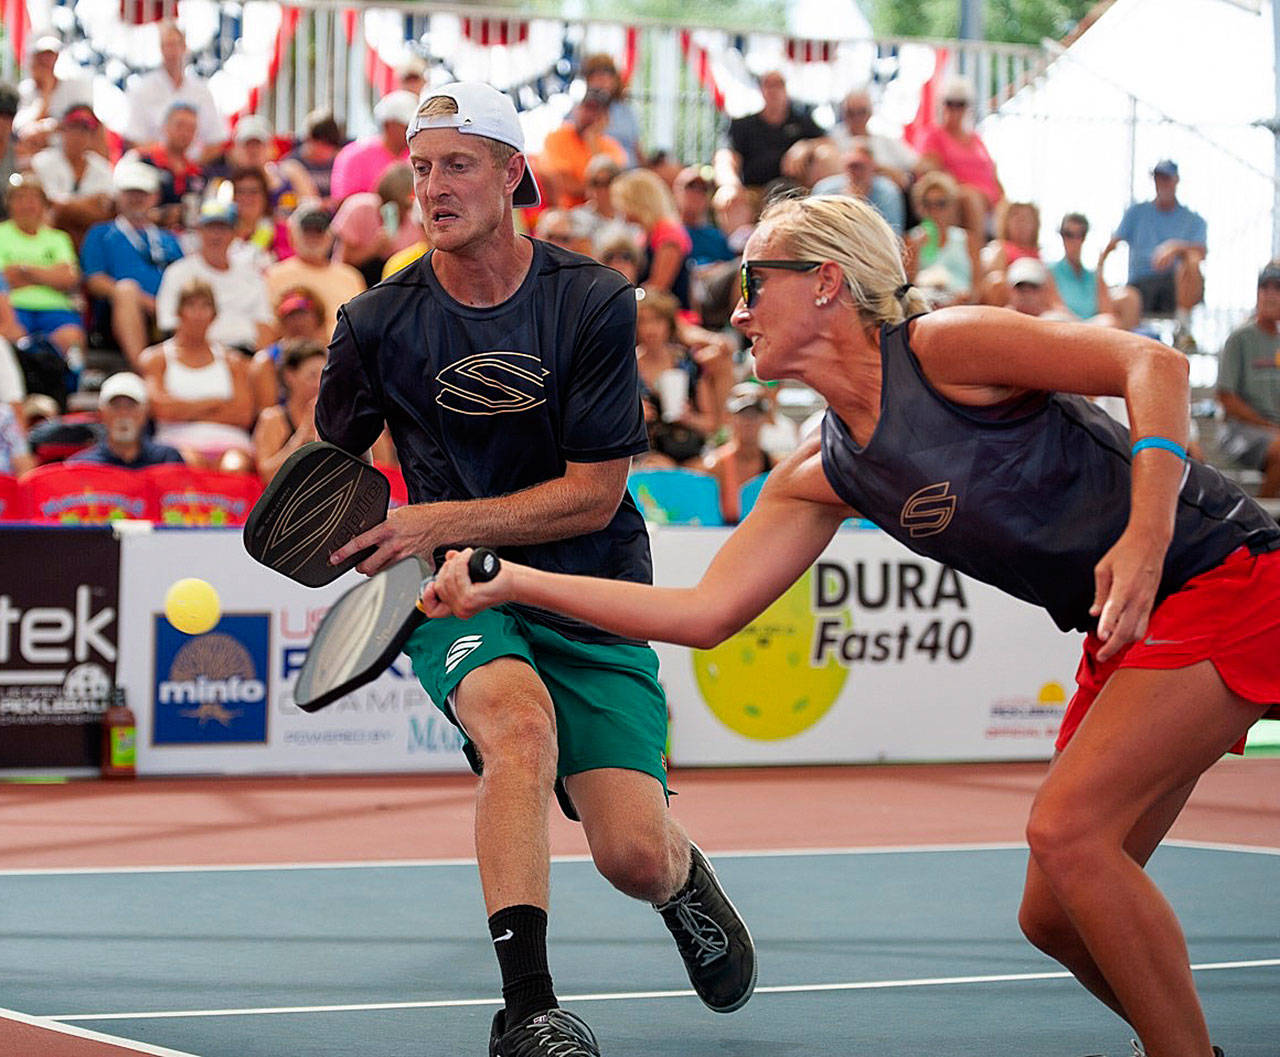 The Newman siblings, Riley, left, and Lindsey, both placed in a professional pickleball tournament earlier this year. (File photo)